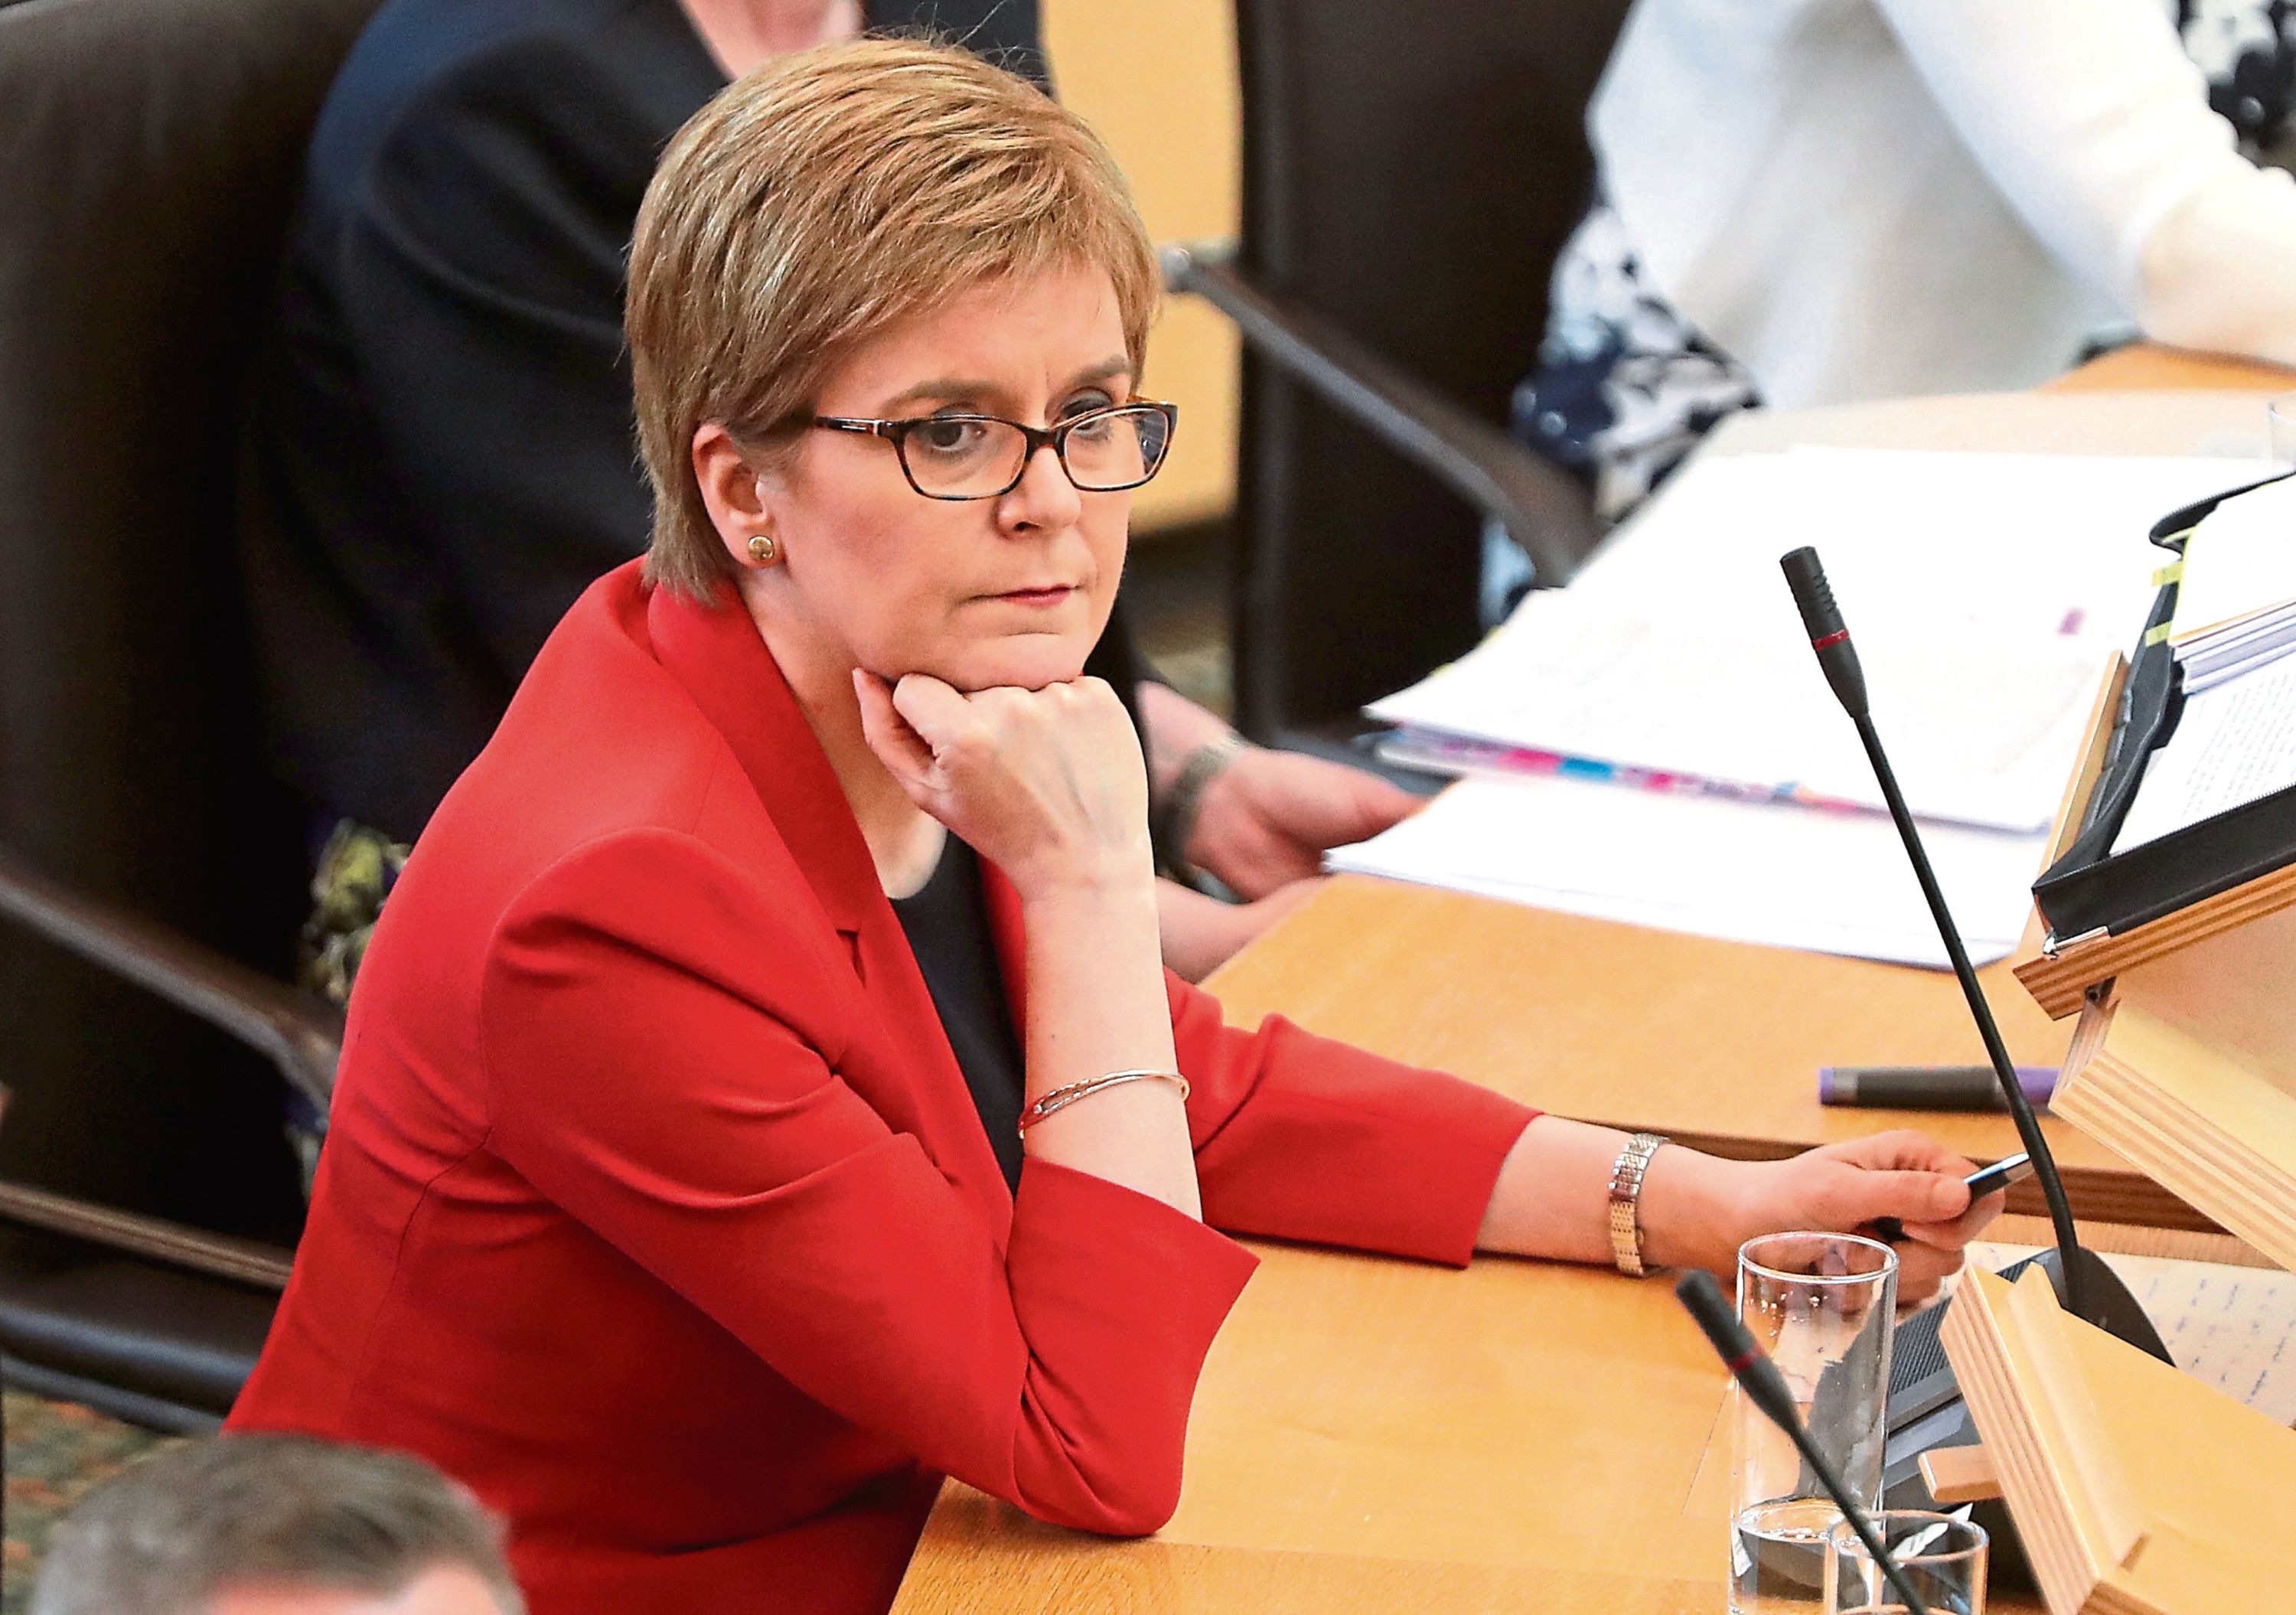 First Minister Nicola Sturgeon during First Minister's Questions at the Scottish Parliament in Edinburgh. PRESS ASSOCIATION Photo. Picture date: Thursday May 31, 2018. See PA story SCOTLAND Questions. Photo credit should read: Andrew Milligan/PA Wire